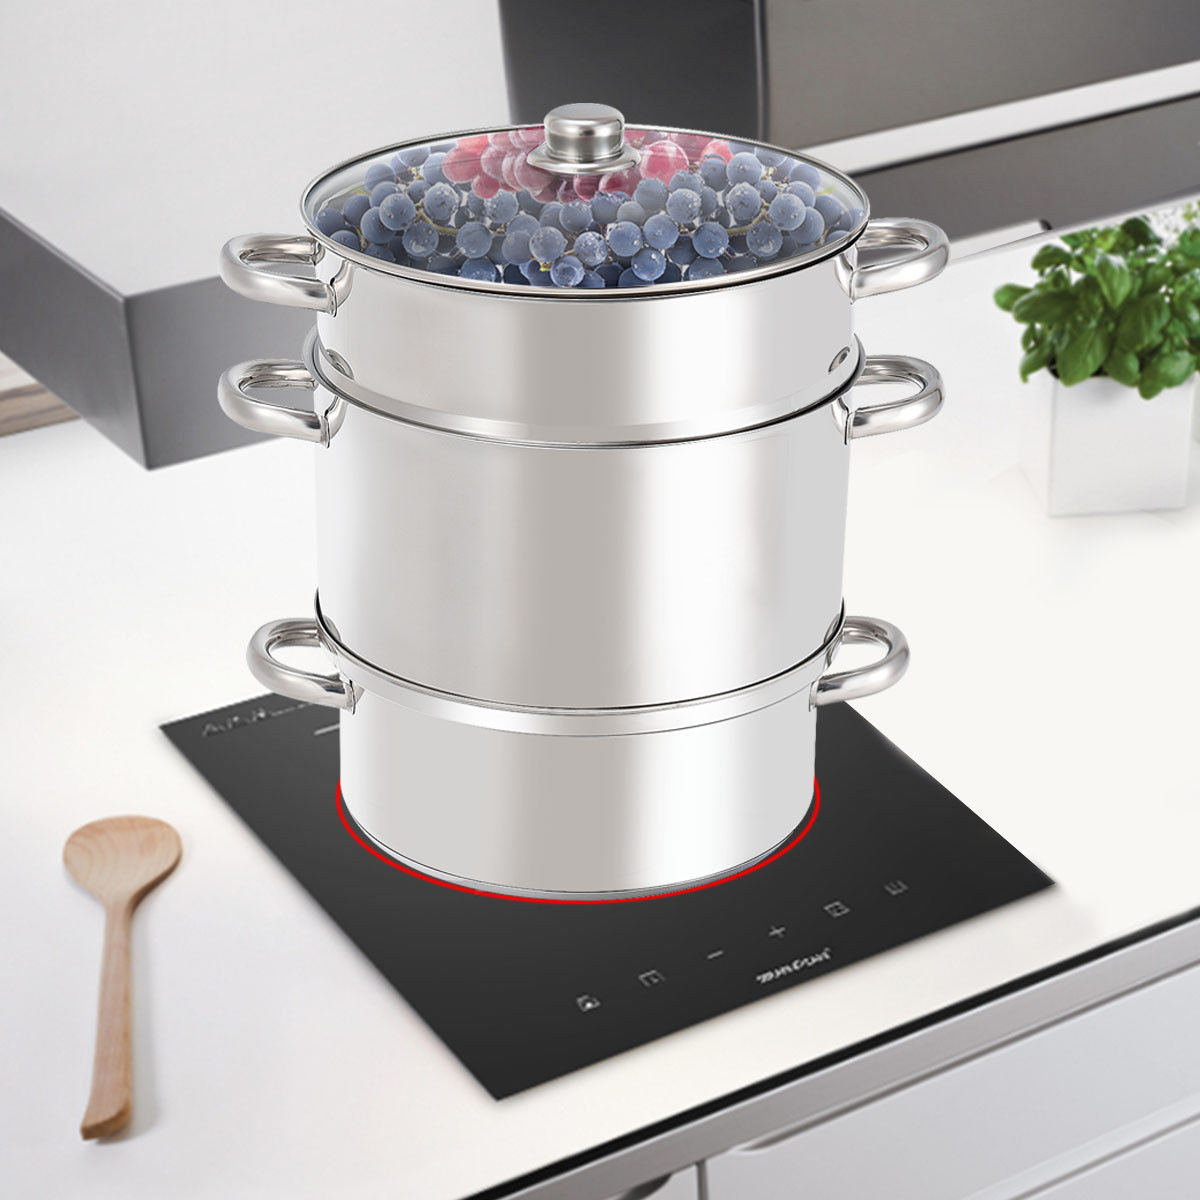 11-Quart Stainless Steel Fruit Juicer Steamer Stove Top W/ Tempered Glass Lid